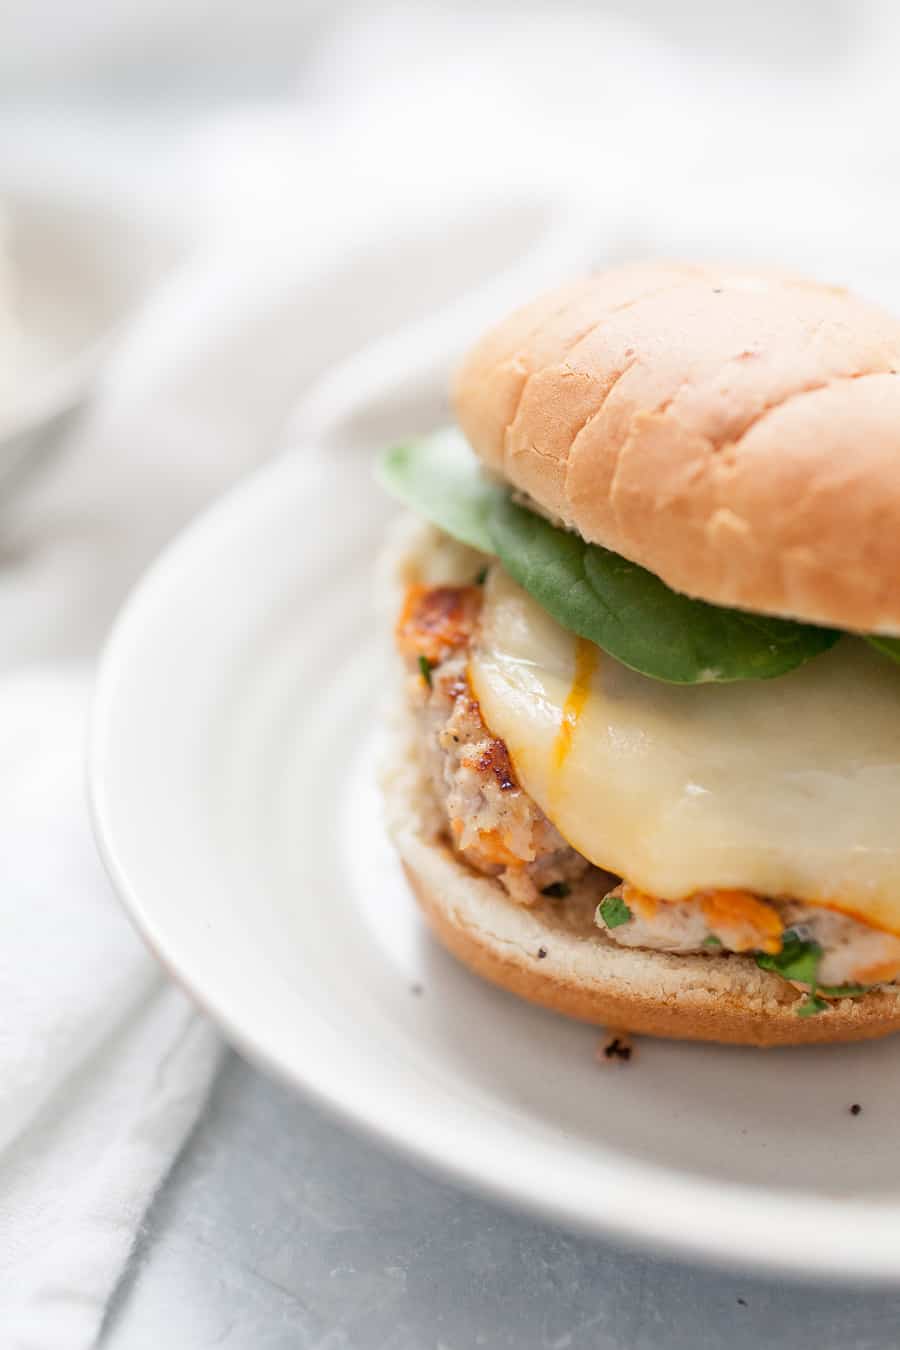 Homemade burgers are so easy to make and the taste can't be beat! This quick recipe is perfect for dinner on the table in under 30 minutes. These homemade sweet potato turkey burgers are made with spinach, sweet potatoes, ground turkey, and spices and topped with cheese on an onion bun. It's such a simple burger but packed full of flavor!